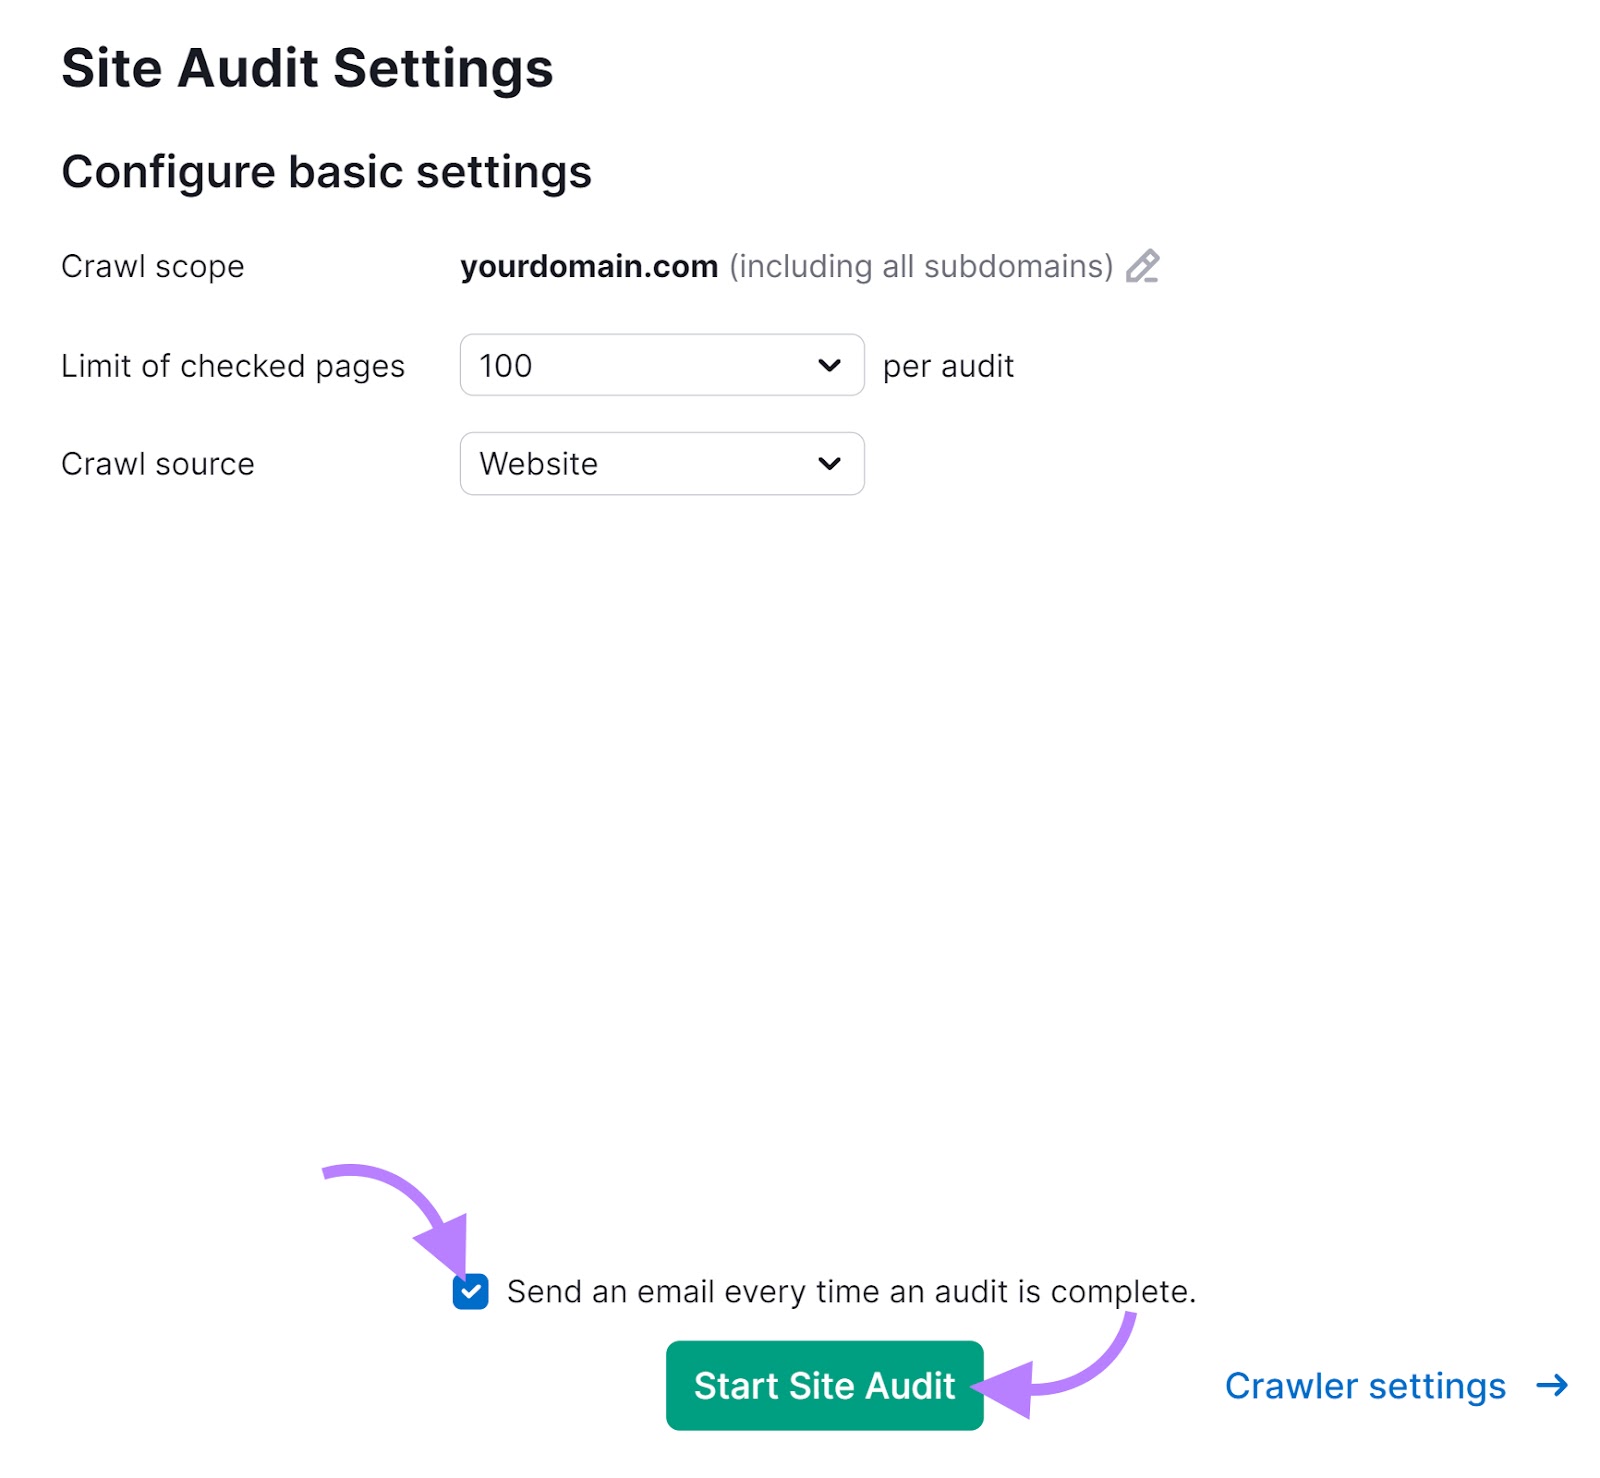 Site Audit Settings with arrows pointing to the email option checkbox and the "Start Site Audit" button.